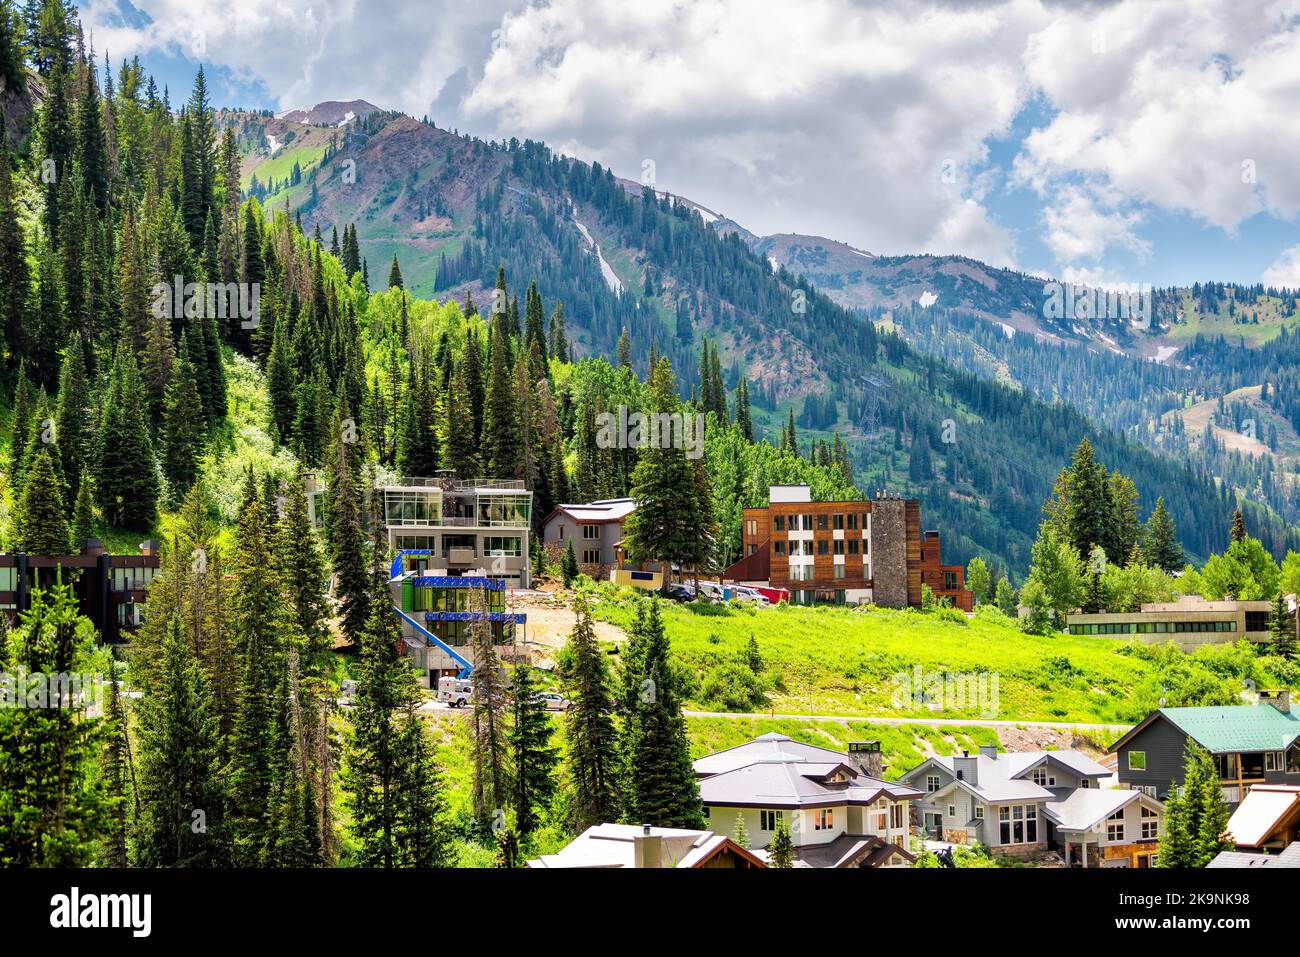 Alta at Albion Basin, Utah cityscape small ski resort town village in summer near Little Cottonwood Canyon by hotel lodge and houses Stock Photo